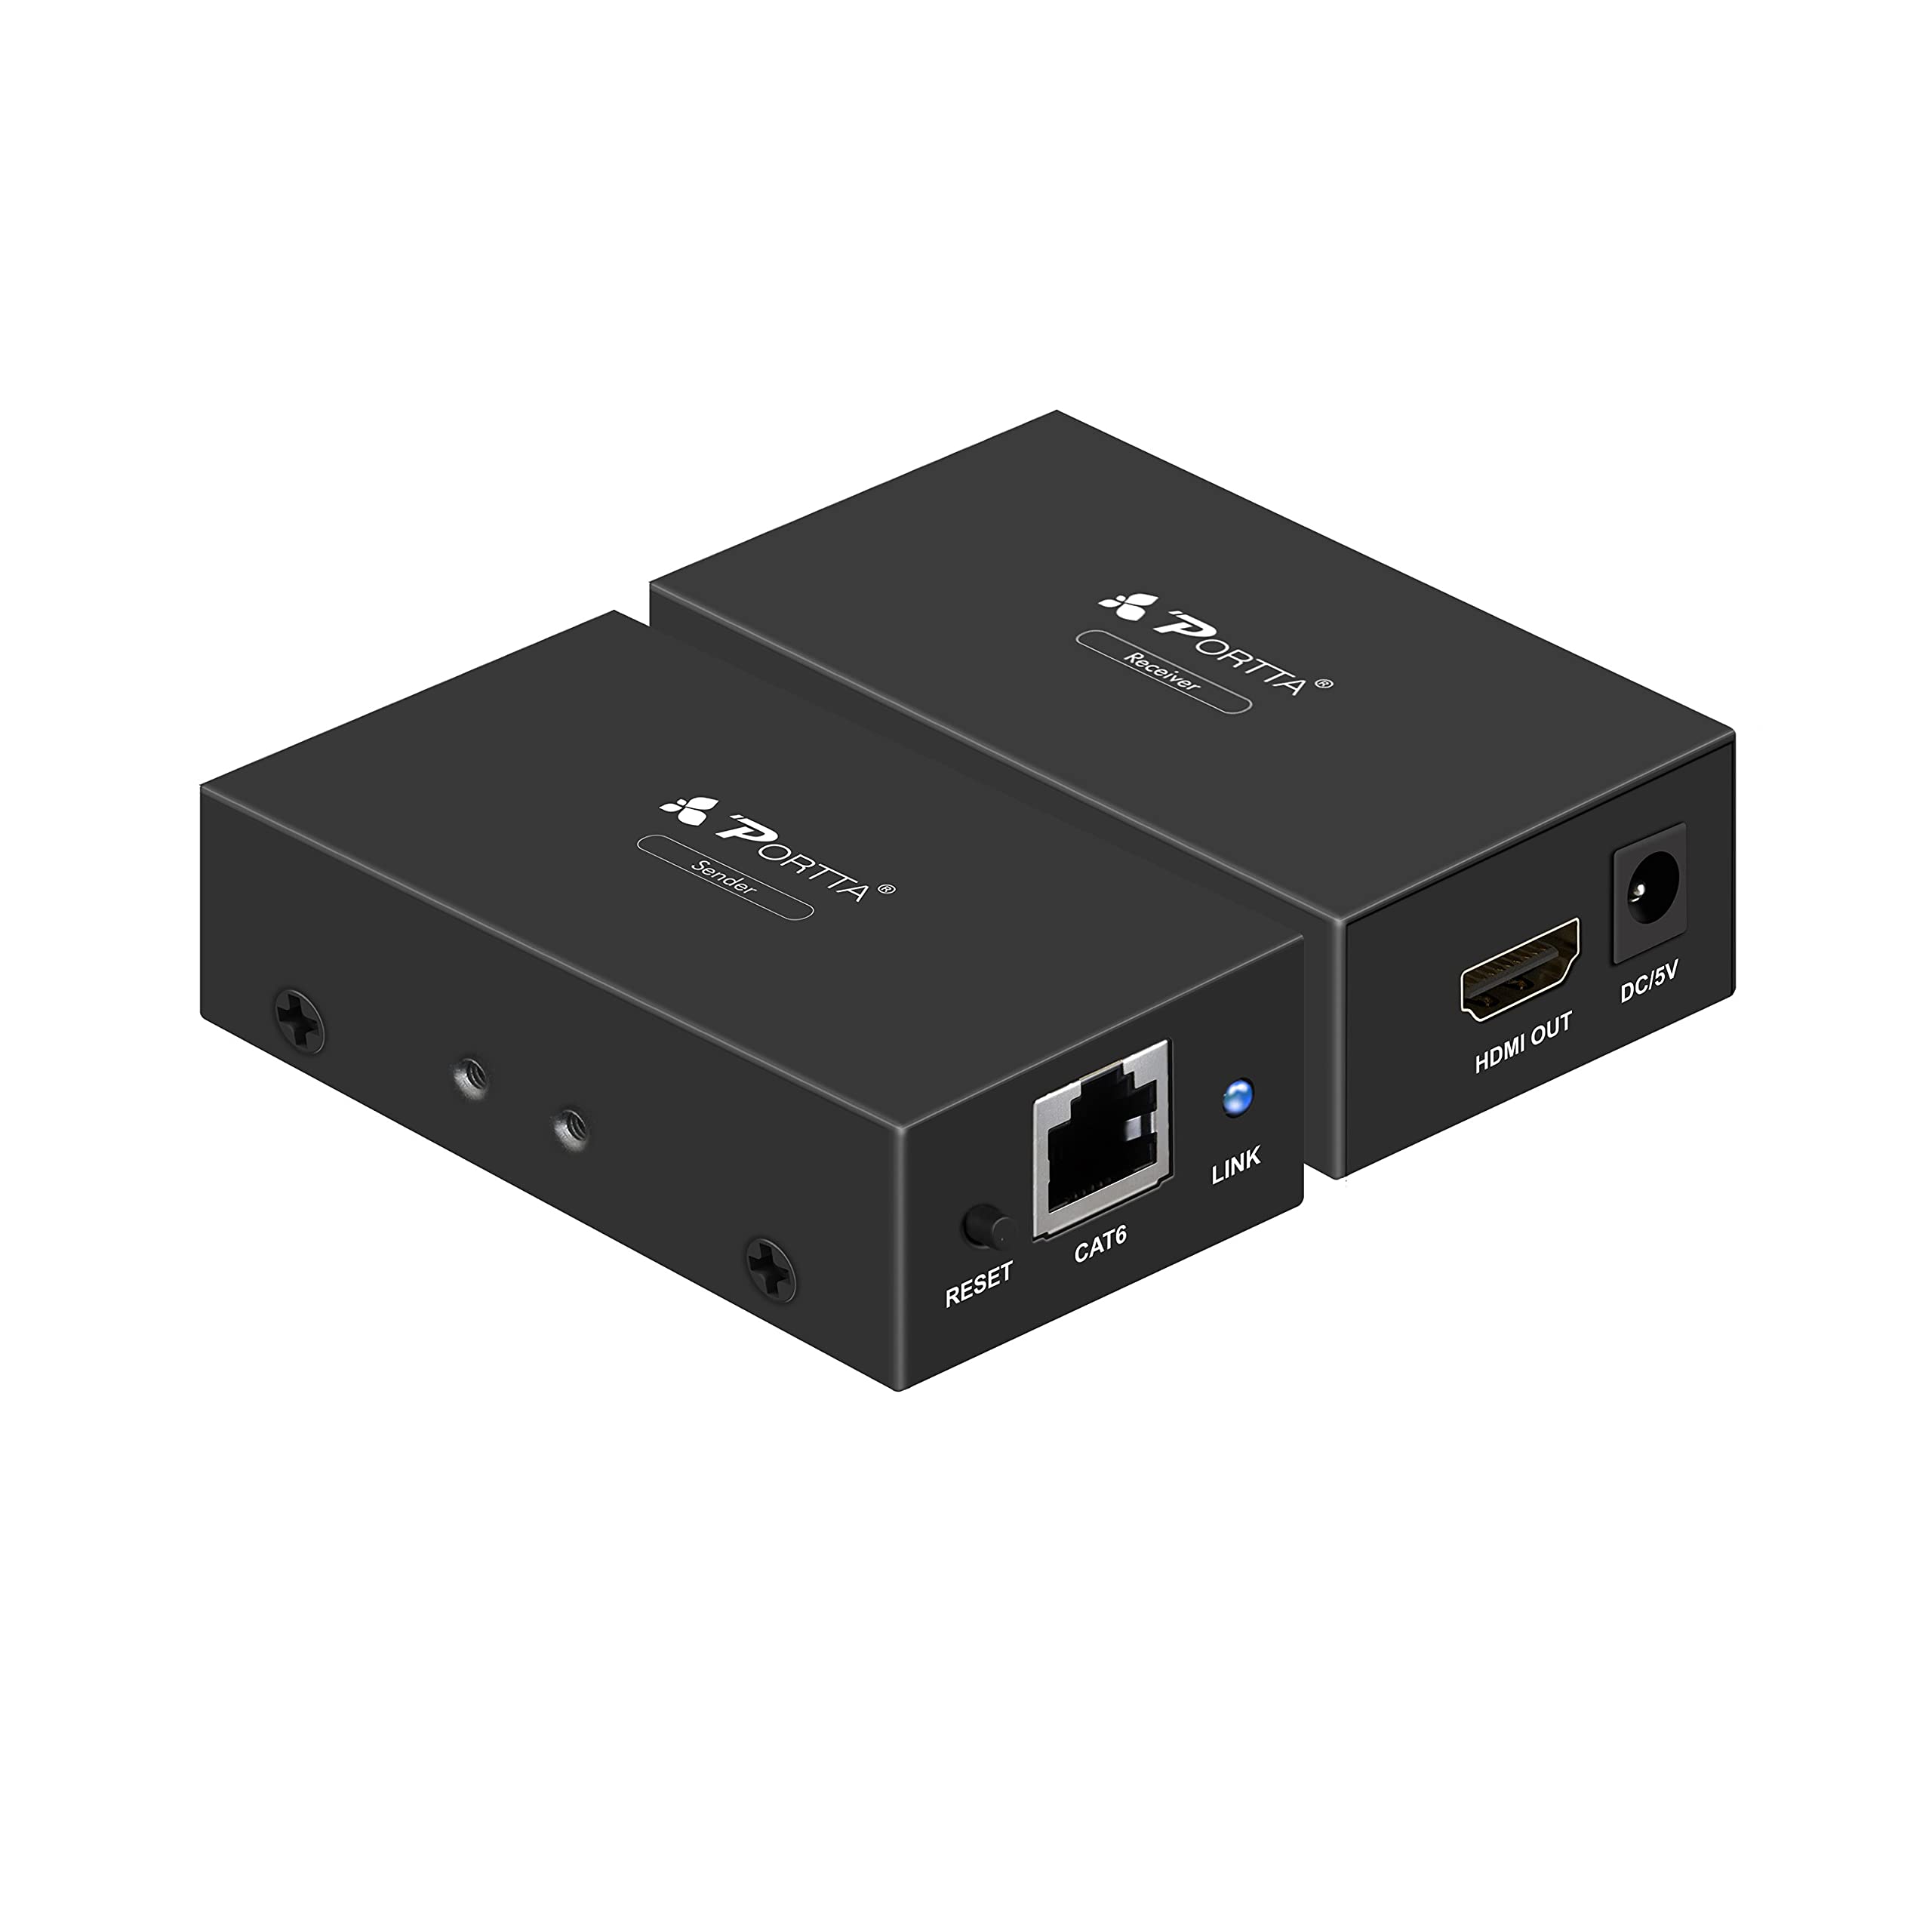 Book Cover Portta HDMI Extender 60m/190ft Lossless Transmission Over Single UTP CAT5e/CAT6 Cable Support Full HD 1080p and 3D for HDTV PS3 PS4 HD-DVD/DVD/Blue-Ray Player HDMI Extender 196ft